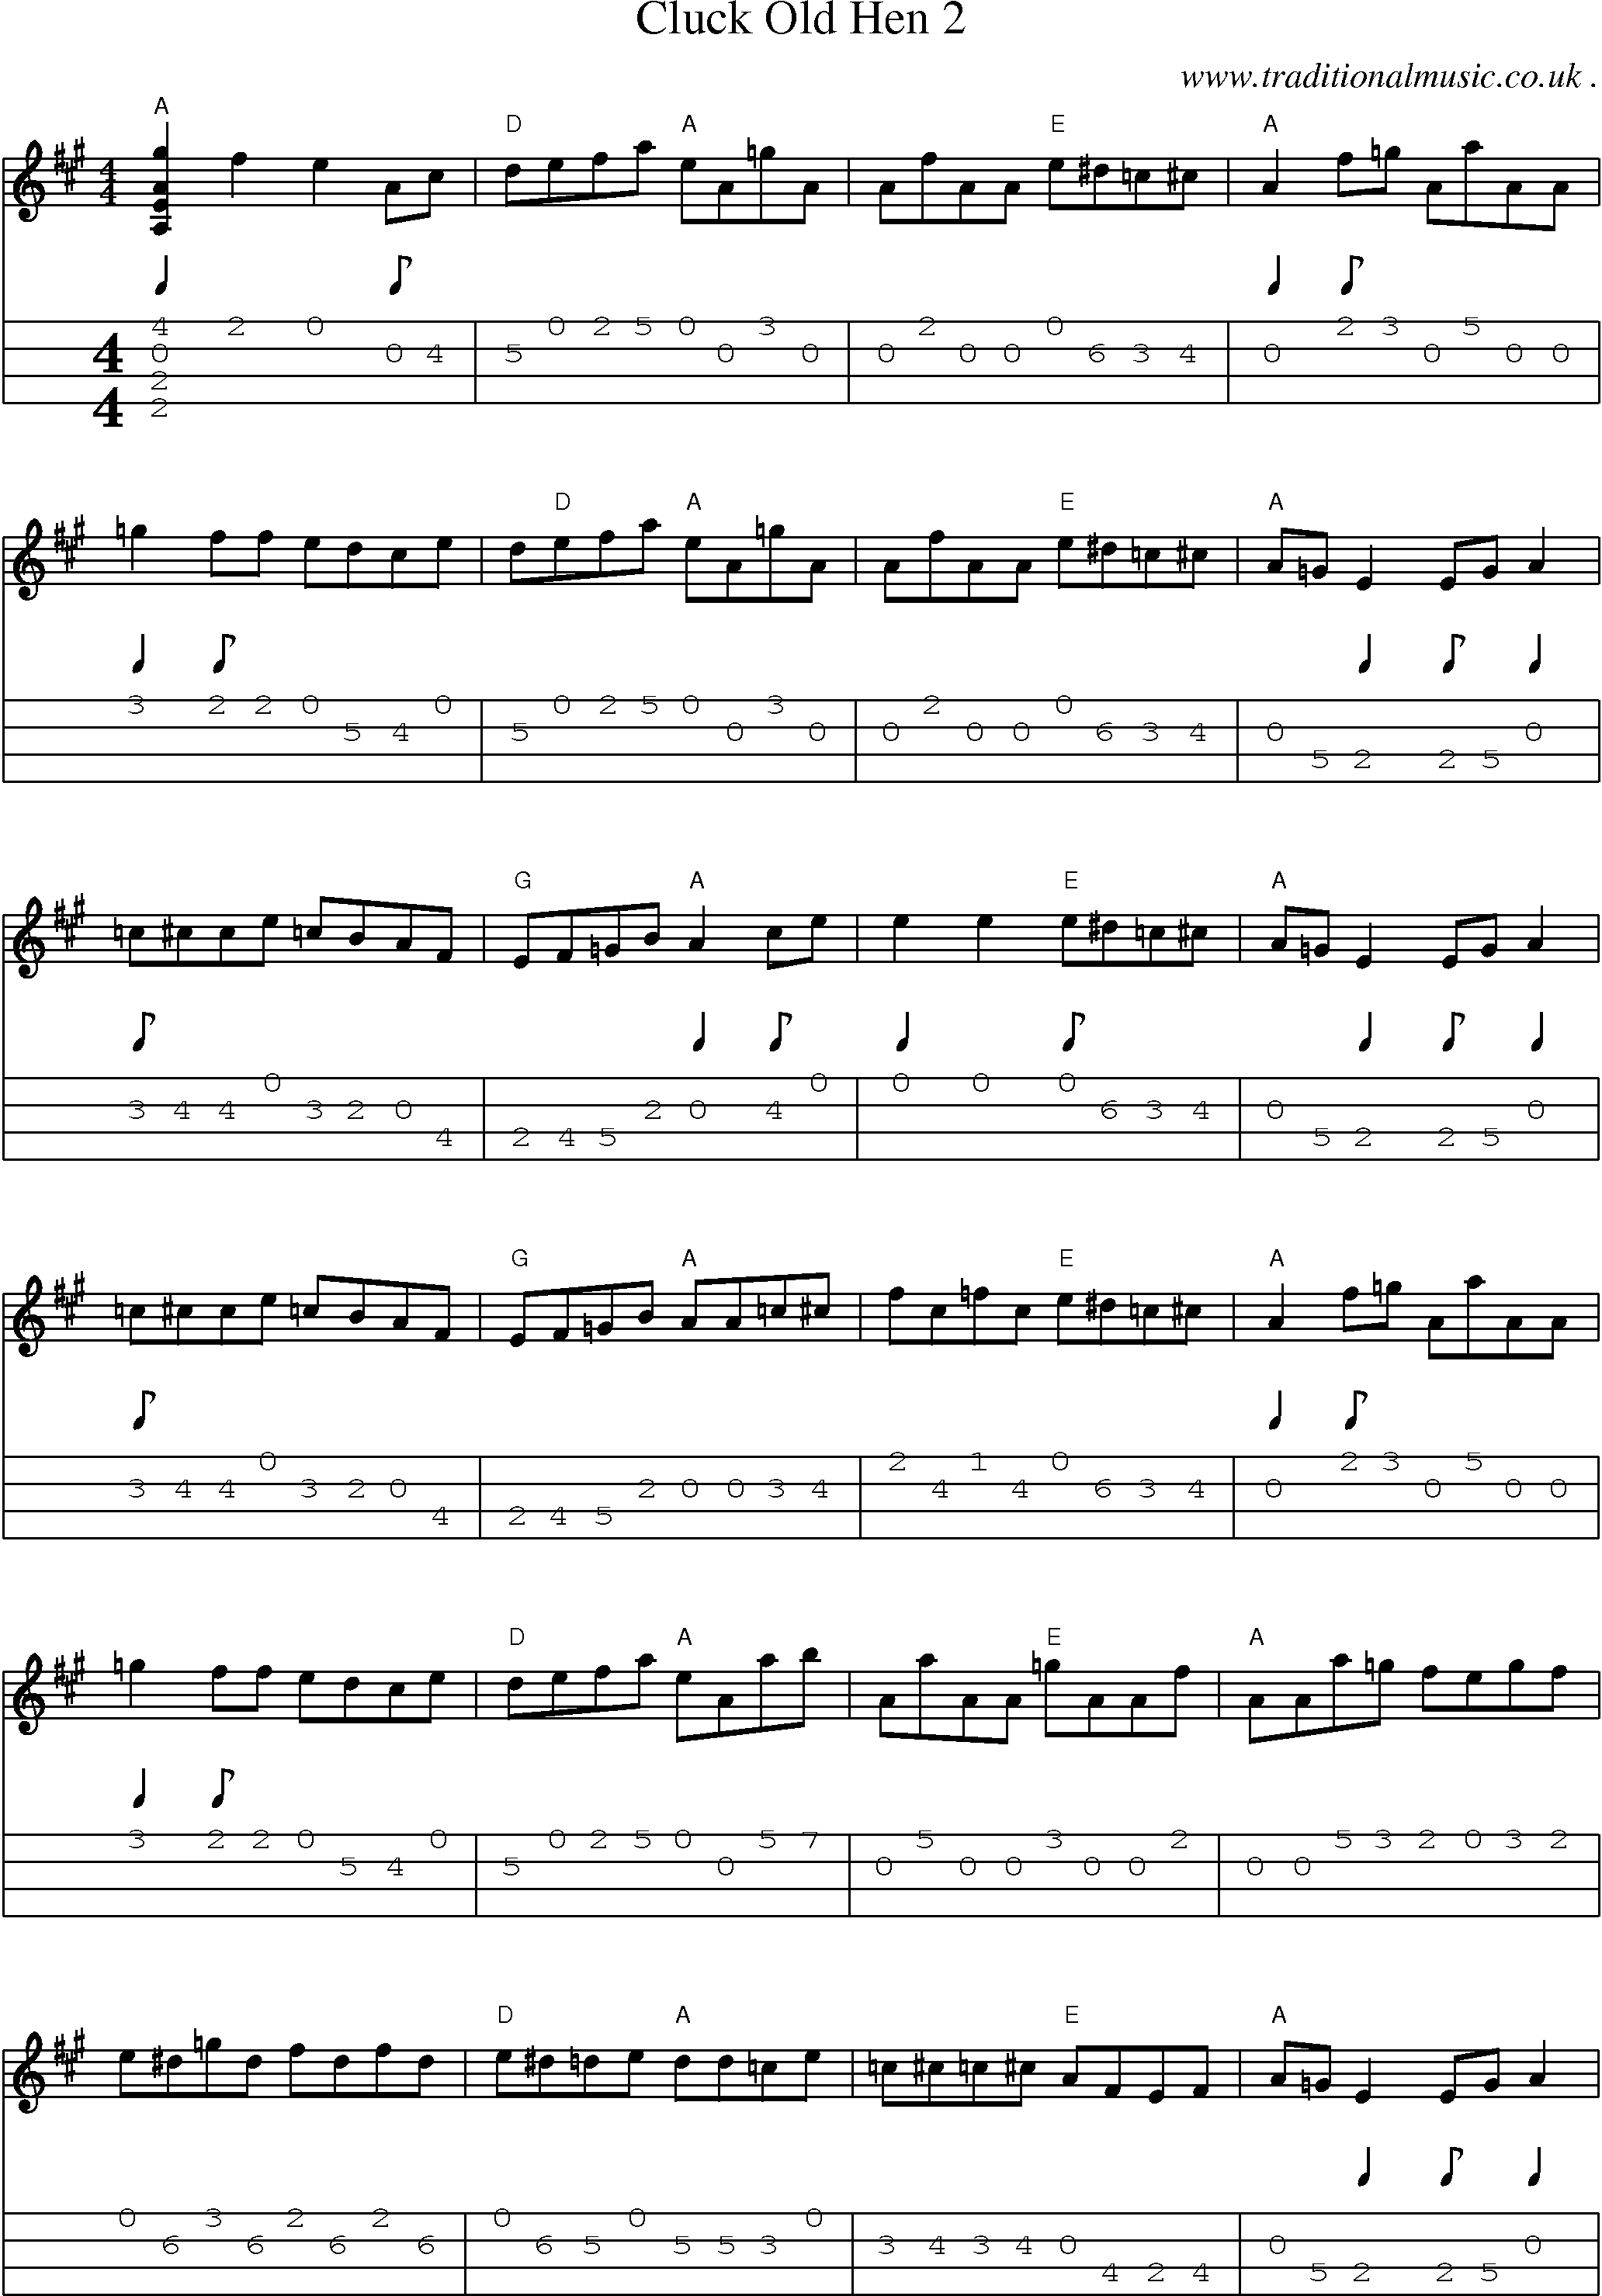 Music Score and Mandolin Tabs for Cluck Old Hen 2